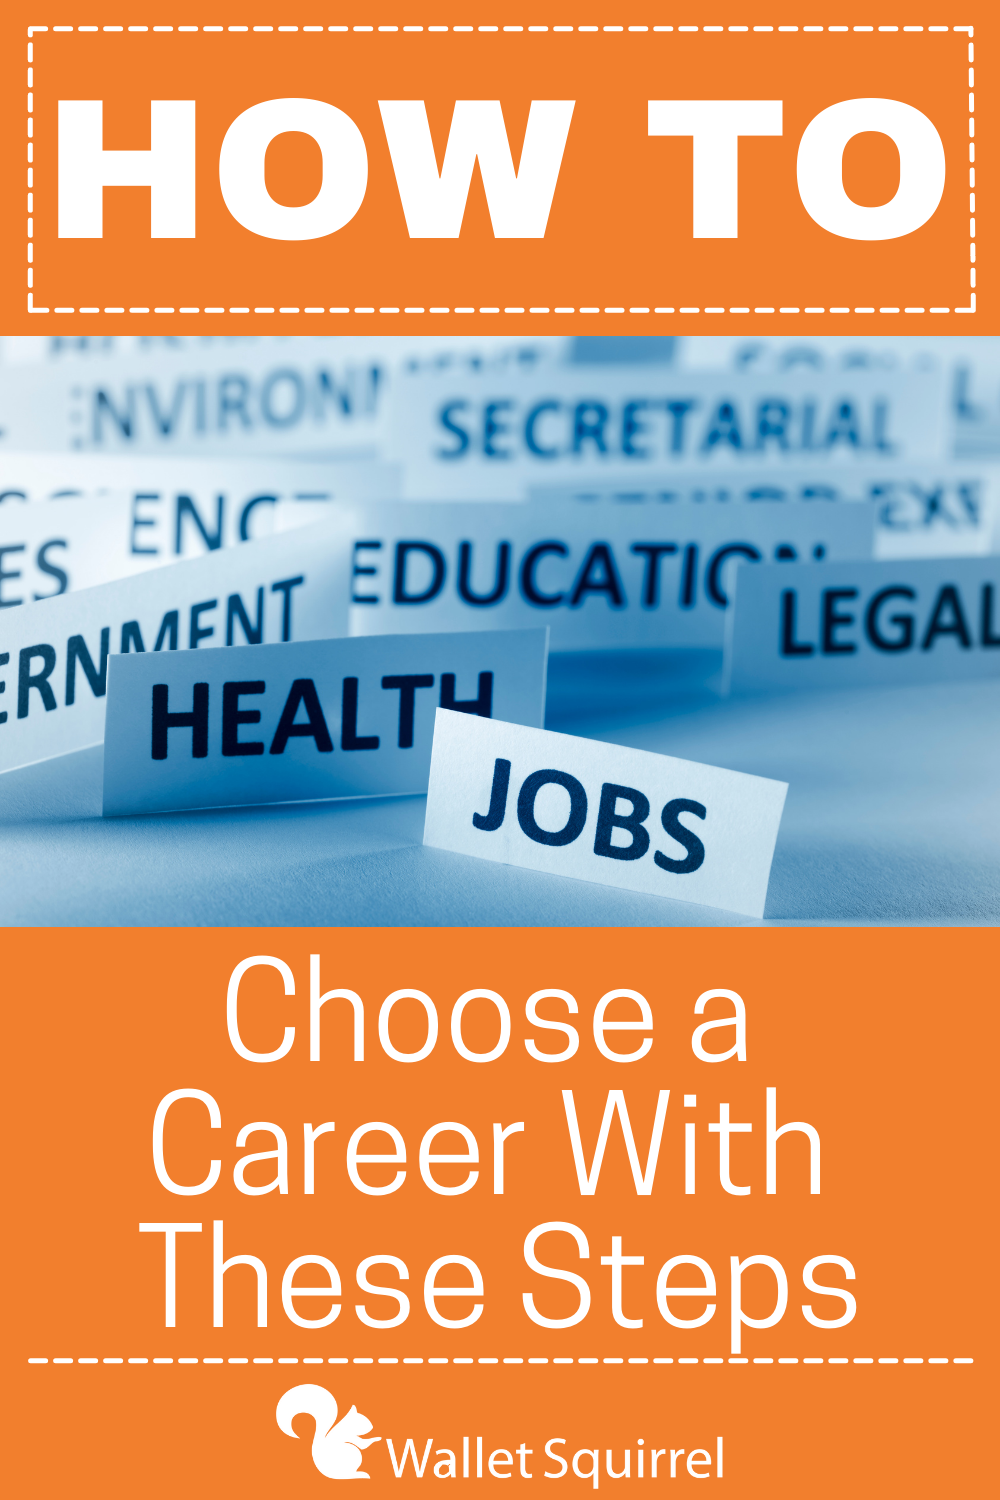 How to choose a career is not an easy task. I can speak from personal experience, if you are having trouble deciding what to do for your career, I promise that you are not alone. This can be a very nerve-racking time in your life. Trust me, I went through a career change in my late twenties that was stressful but it worked out really well in the long run. My goal is to use the lessons I learned to help you out. #lifehack #lifeadvice #jobsearch